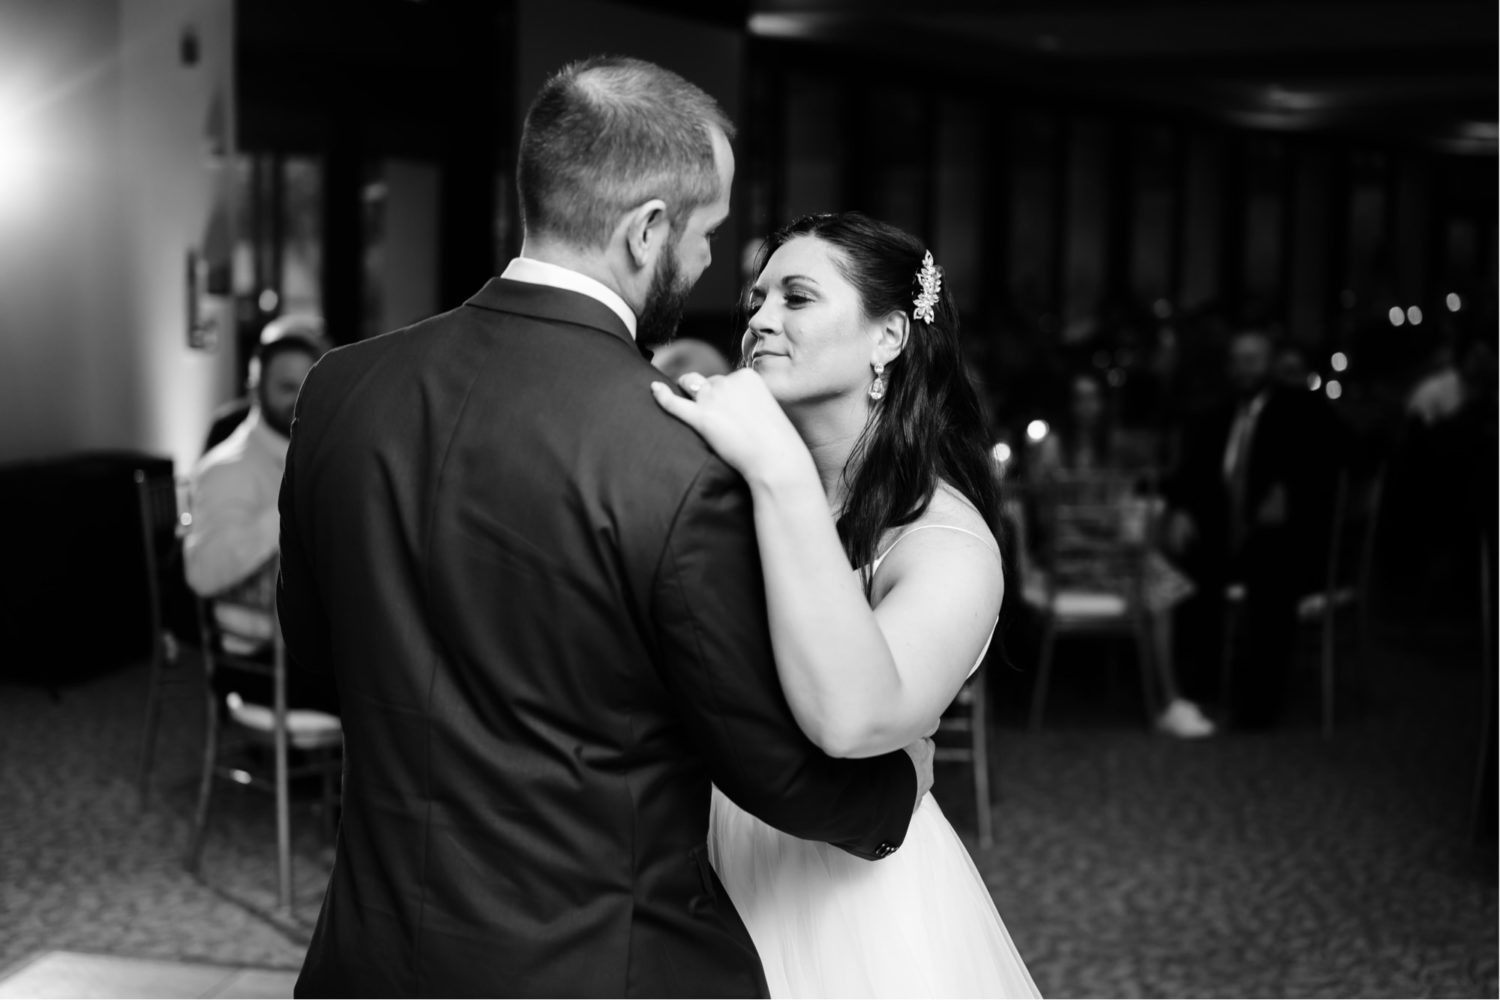 Beautiful bride and groom first dance photos in black and white